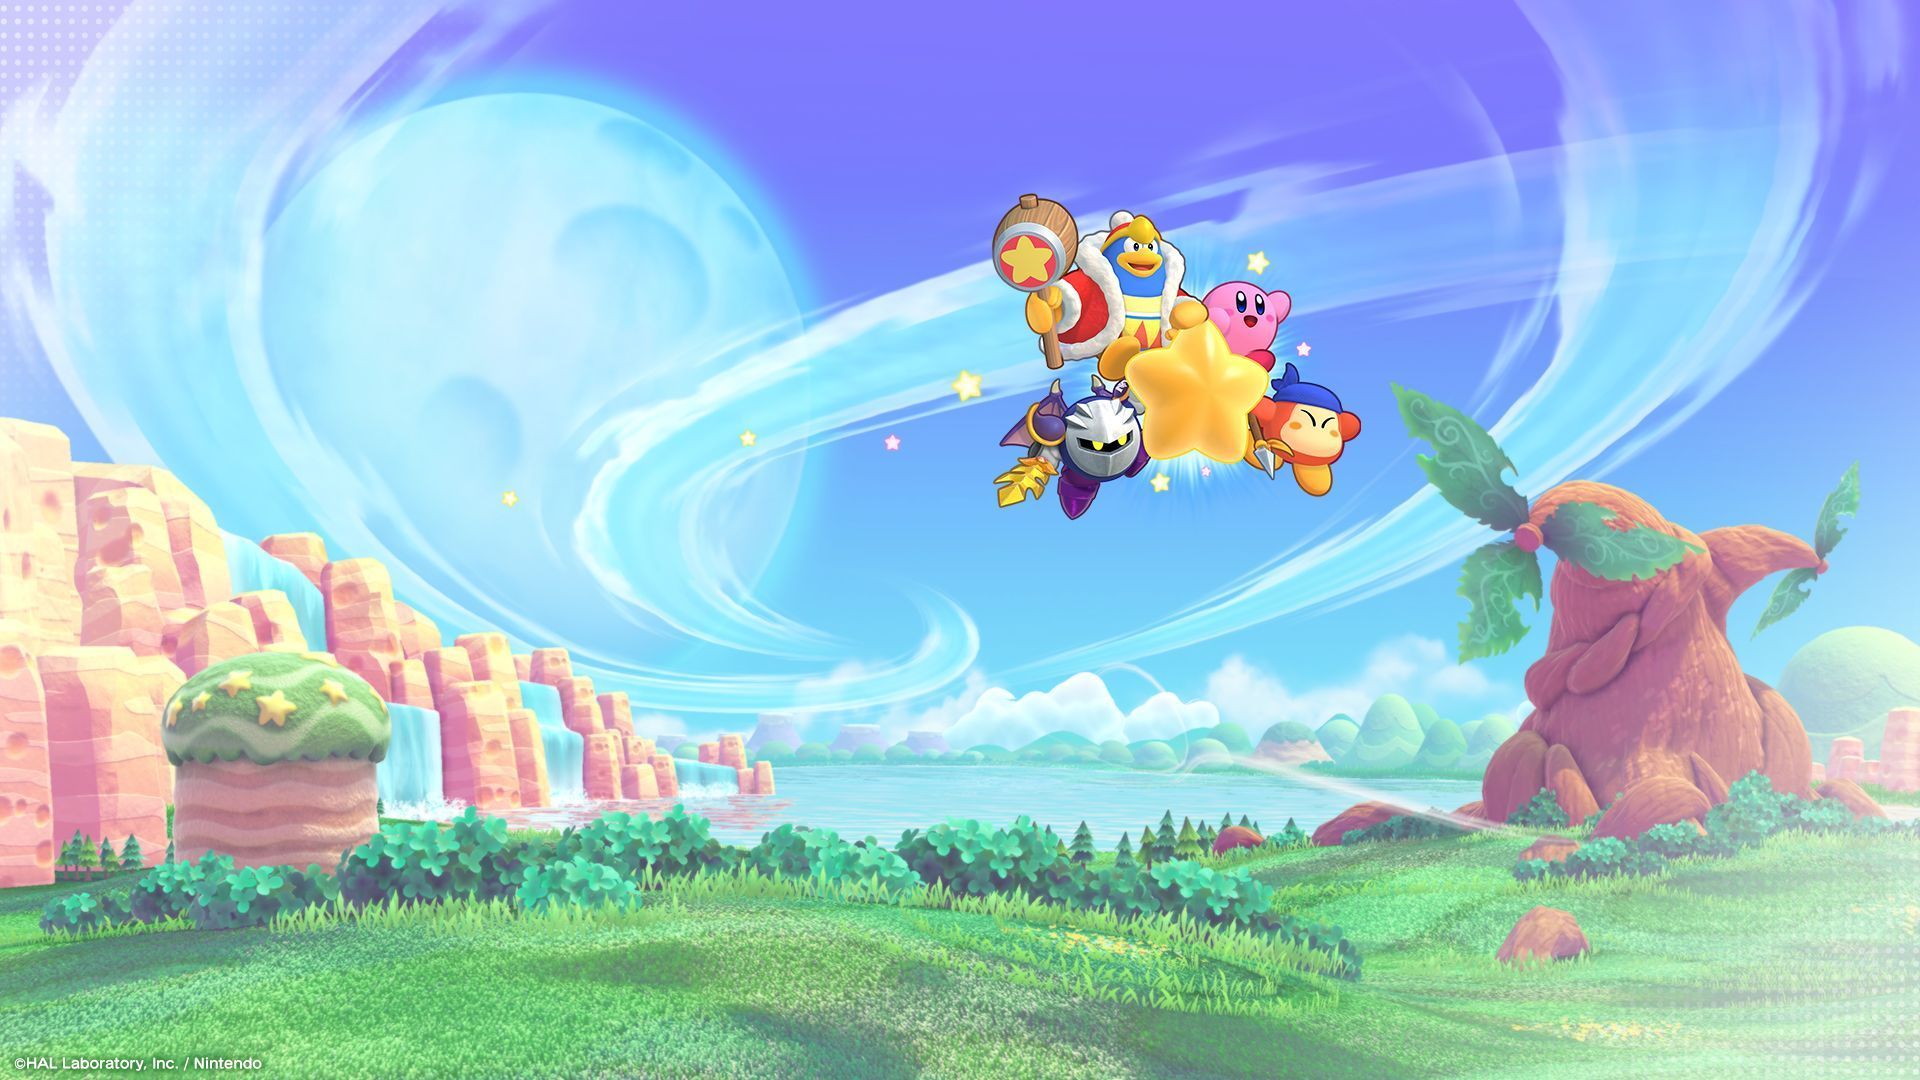 Characters from the game Kirby Star Allies fly through the air - Kirby